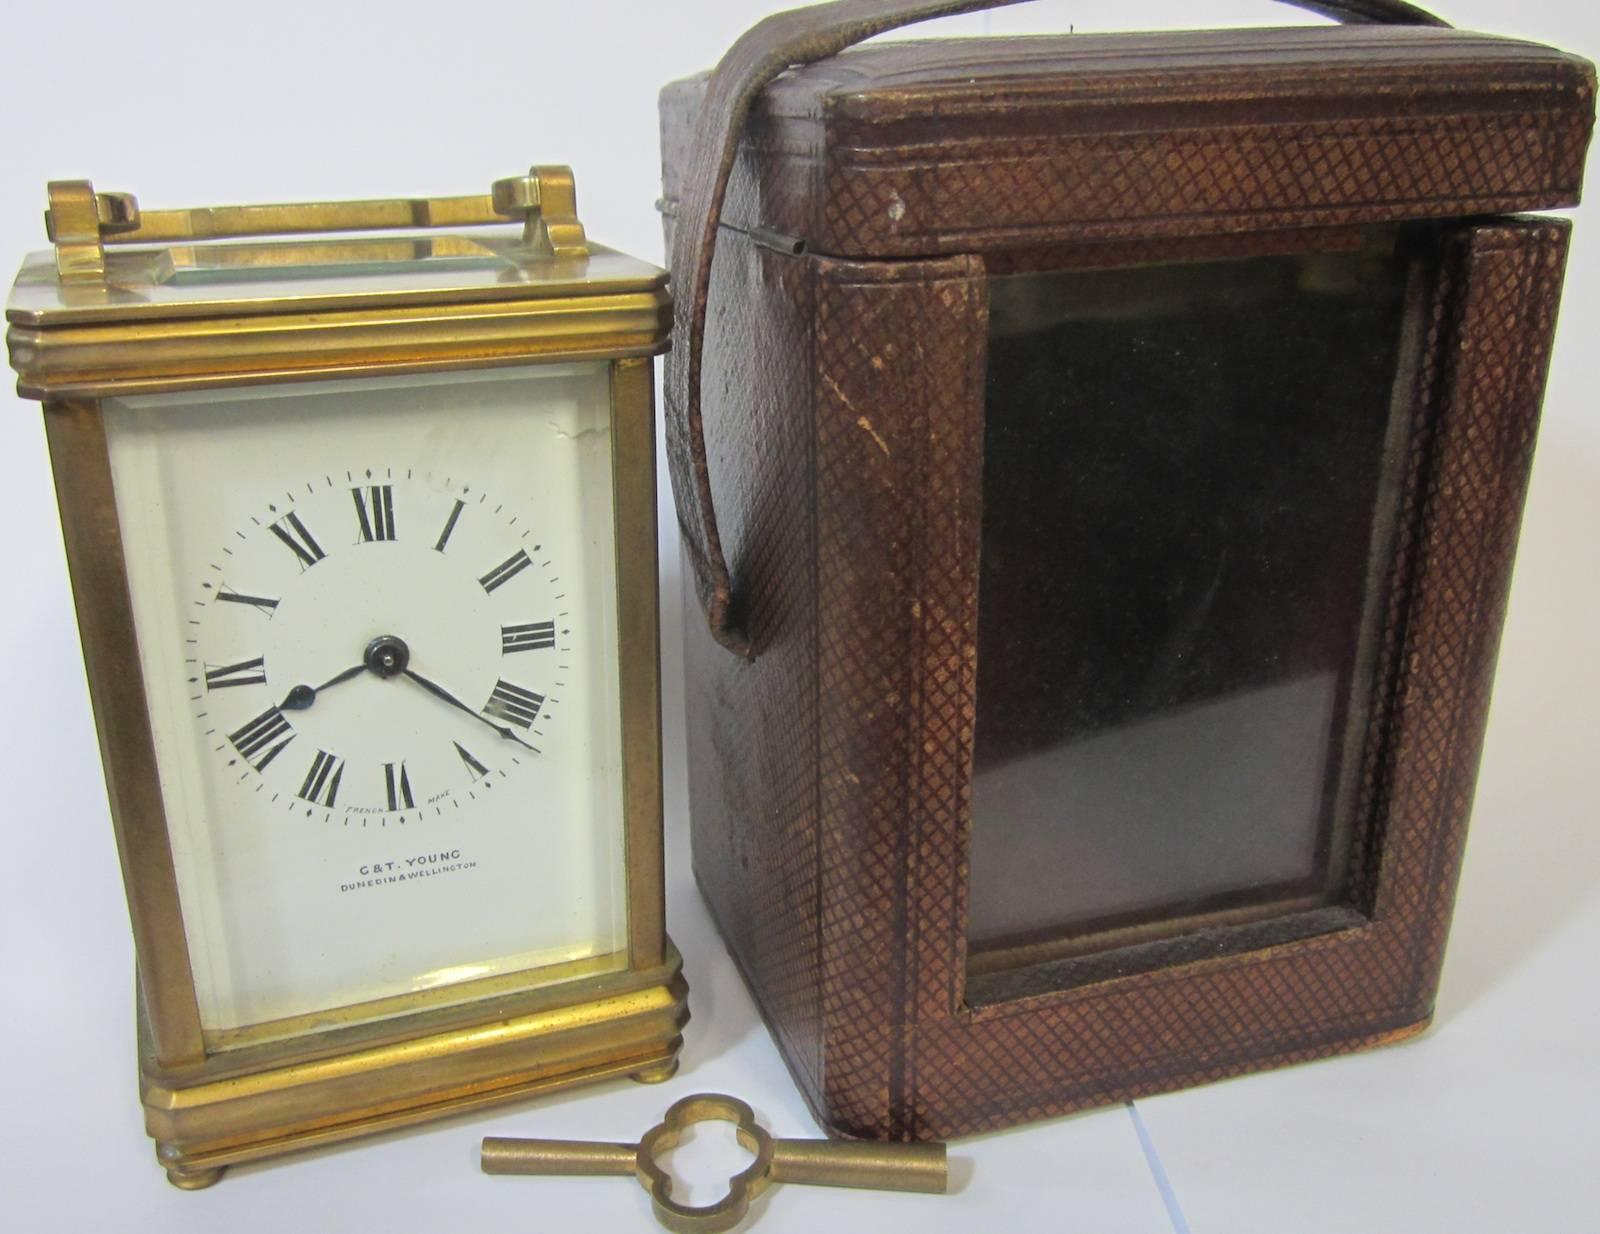 French carriage clock, with original case and key,
retailed by G&T Young, Dunedin & Wellington,
(established in Dunedin in 1862, the Wellington branch was founded in 1889).
Measures: 7.5 x 6 x 11cm high.